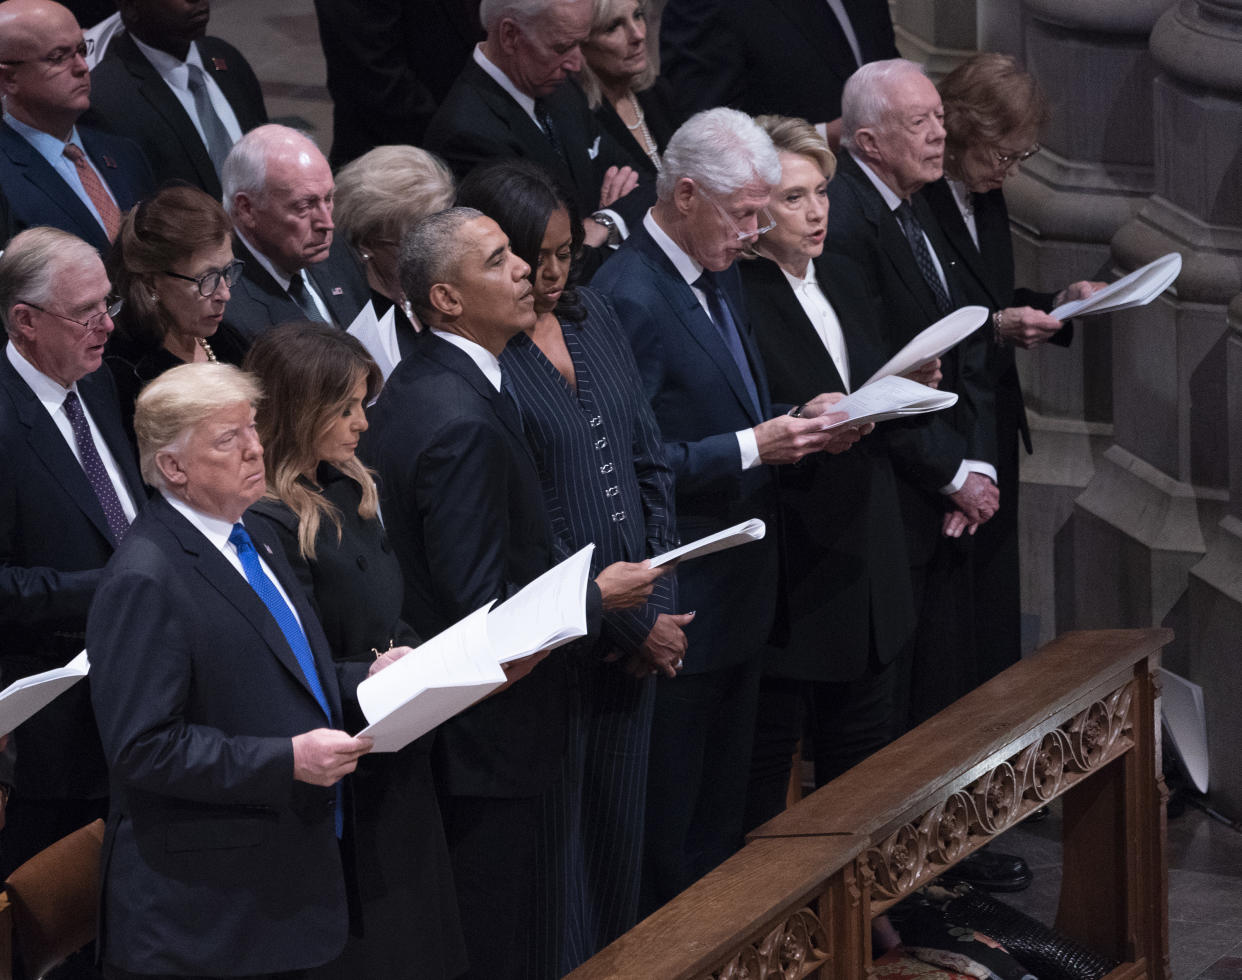 WASHINGTON, DC – DECEMBER 05: (AFP- OUT) United States President Donald J. Trump, First Lady Melania Trump, Barack Obama, Michelle Obama, Bill Clinton, Hillary Clinton, Jimmy Carter and Rosalyn Carter attend the state funeral service of former President George W. Bush at the National Cathedral, December 5, 2018 in Washington, DC. President Bush will be buried at his final resting place at the George H.W. Bush Presidential Library at Texas A&M University in College Station, Texas. A WWII combat veteran, Bush served as a member of Congress from Texas, ambassador to the United Nations, director of the CIA, vice president and 41st president of the United States. (Photo by Chris Kleponis-Pool/Getty Images)